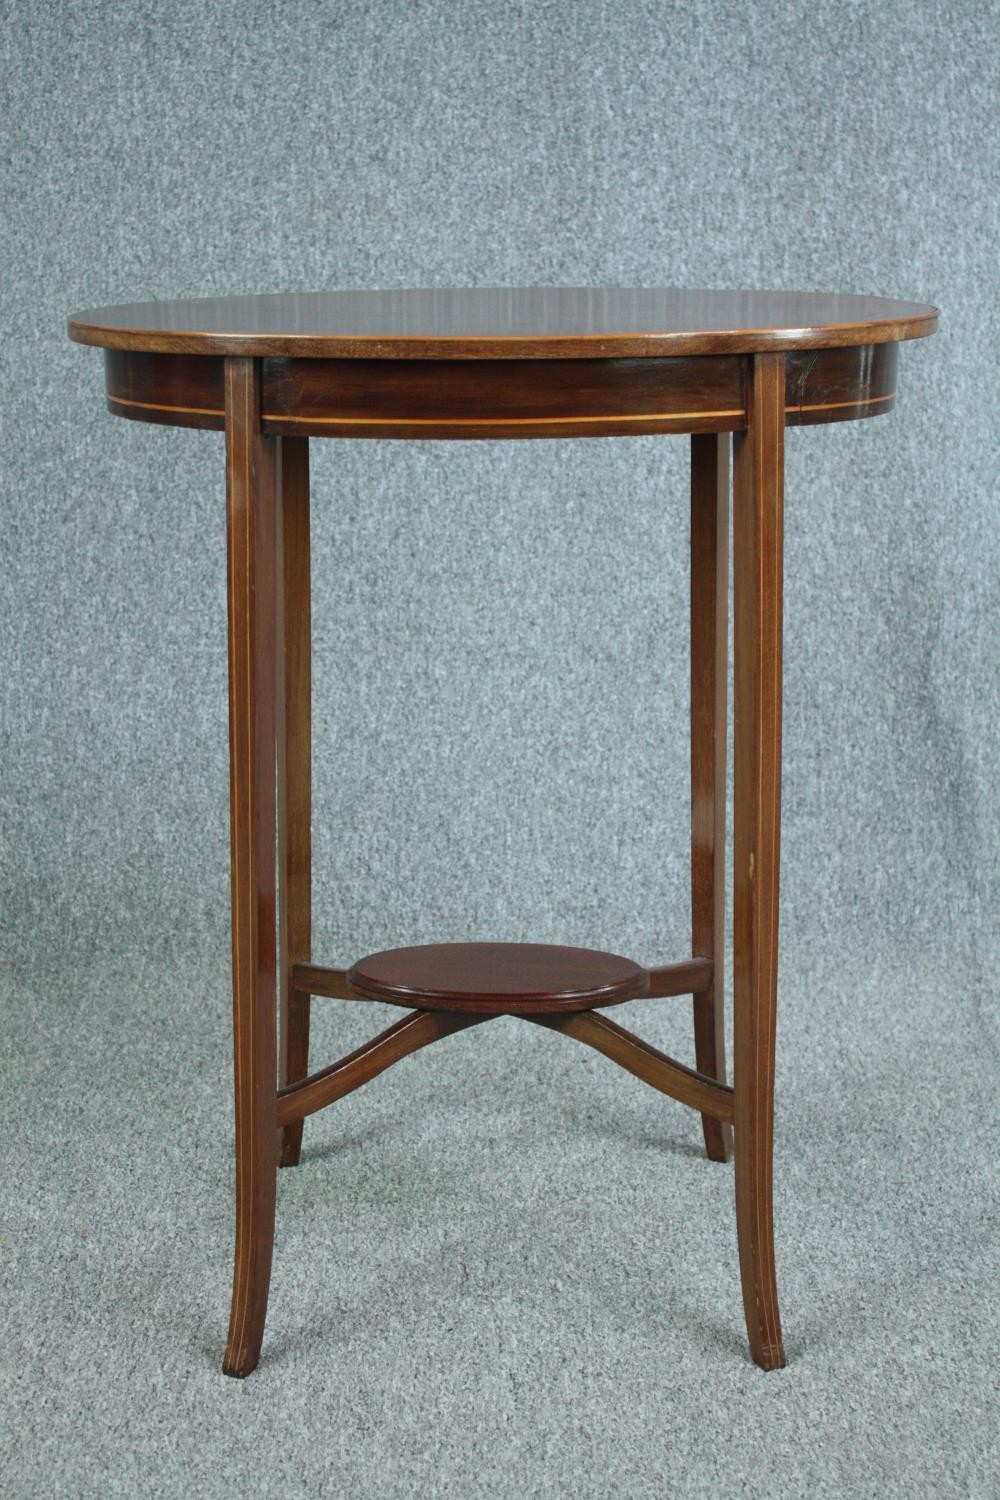 Occasional table, Edwardian mahogany with satinwood inlay. H.73 W.60 D.43cm. - Image 2 of 5